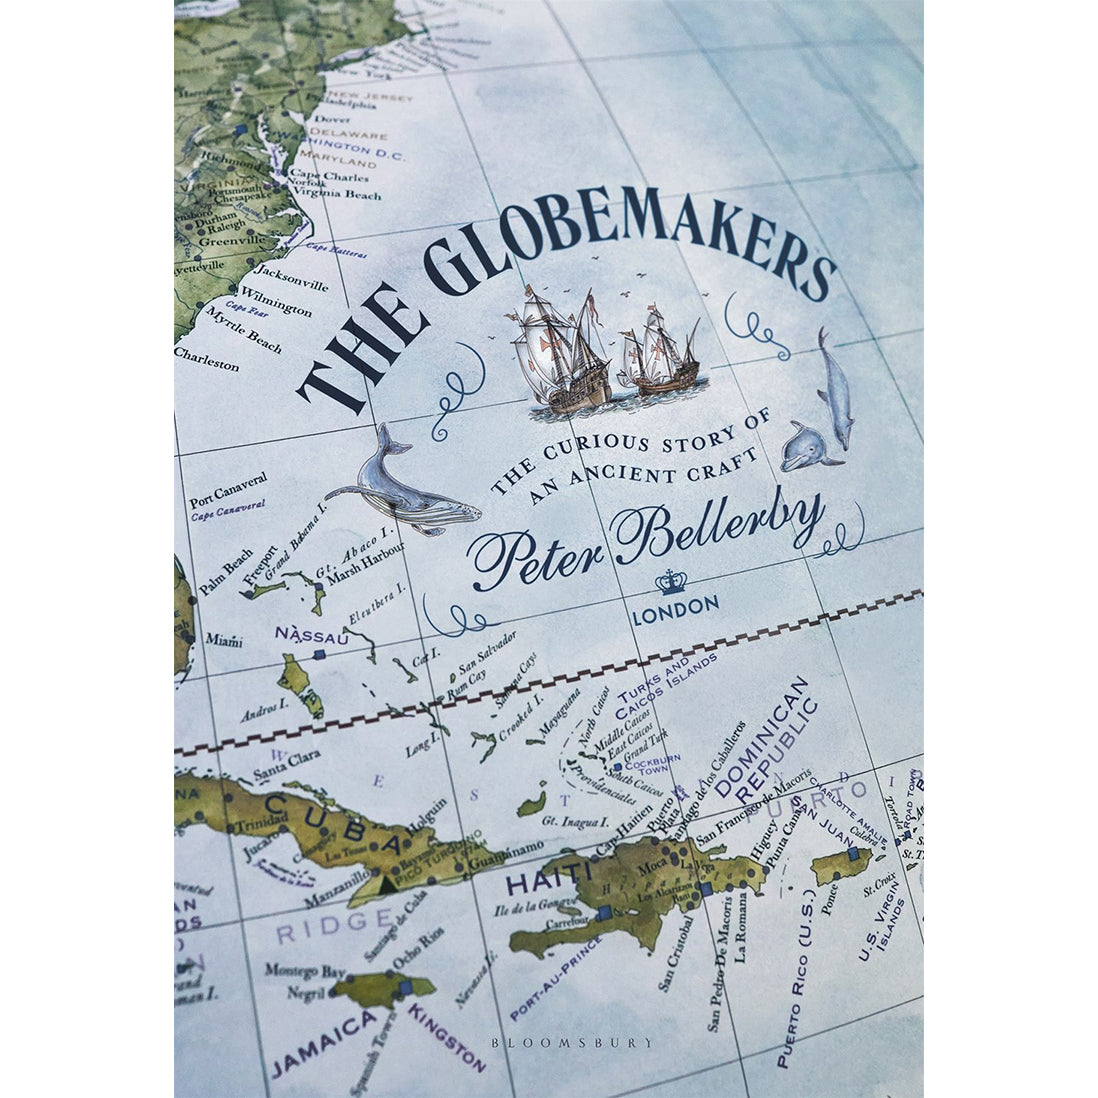 The Globemakers: The Curious Story of an Ancient Craft